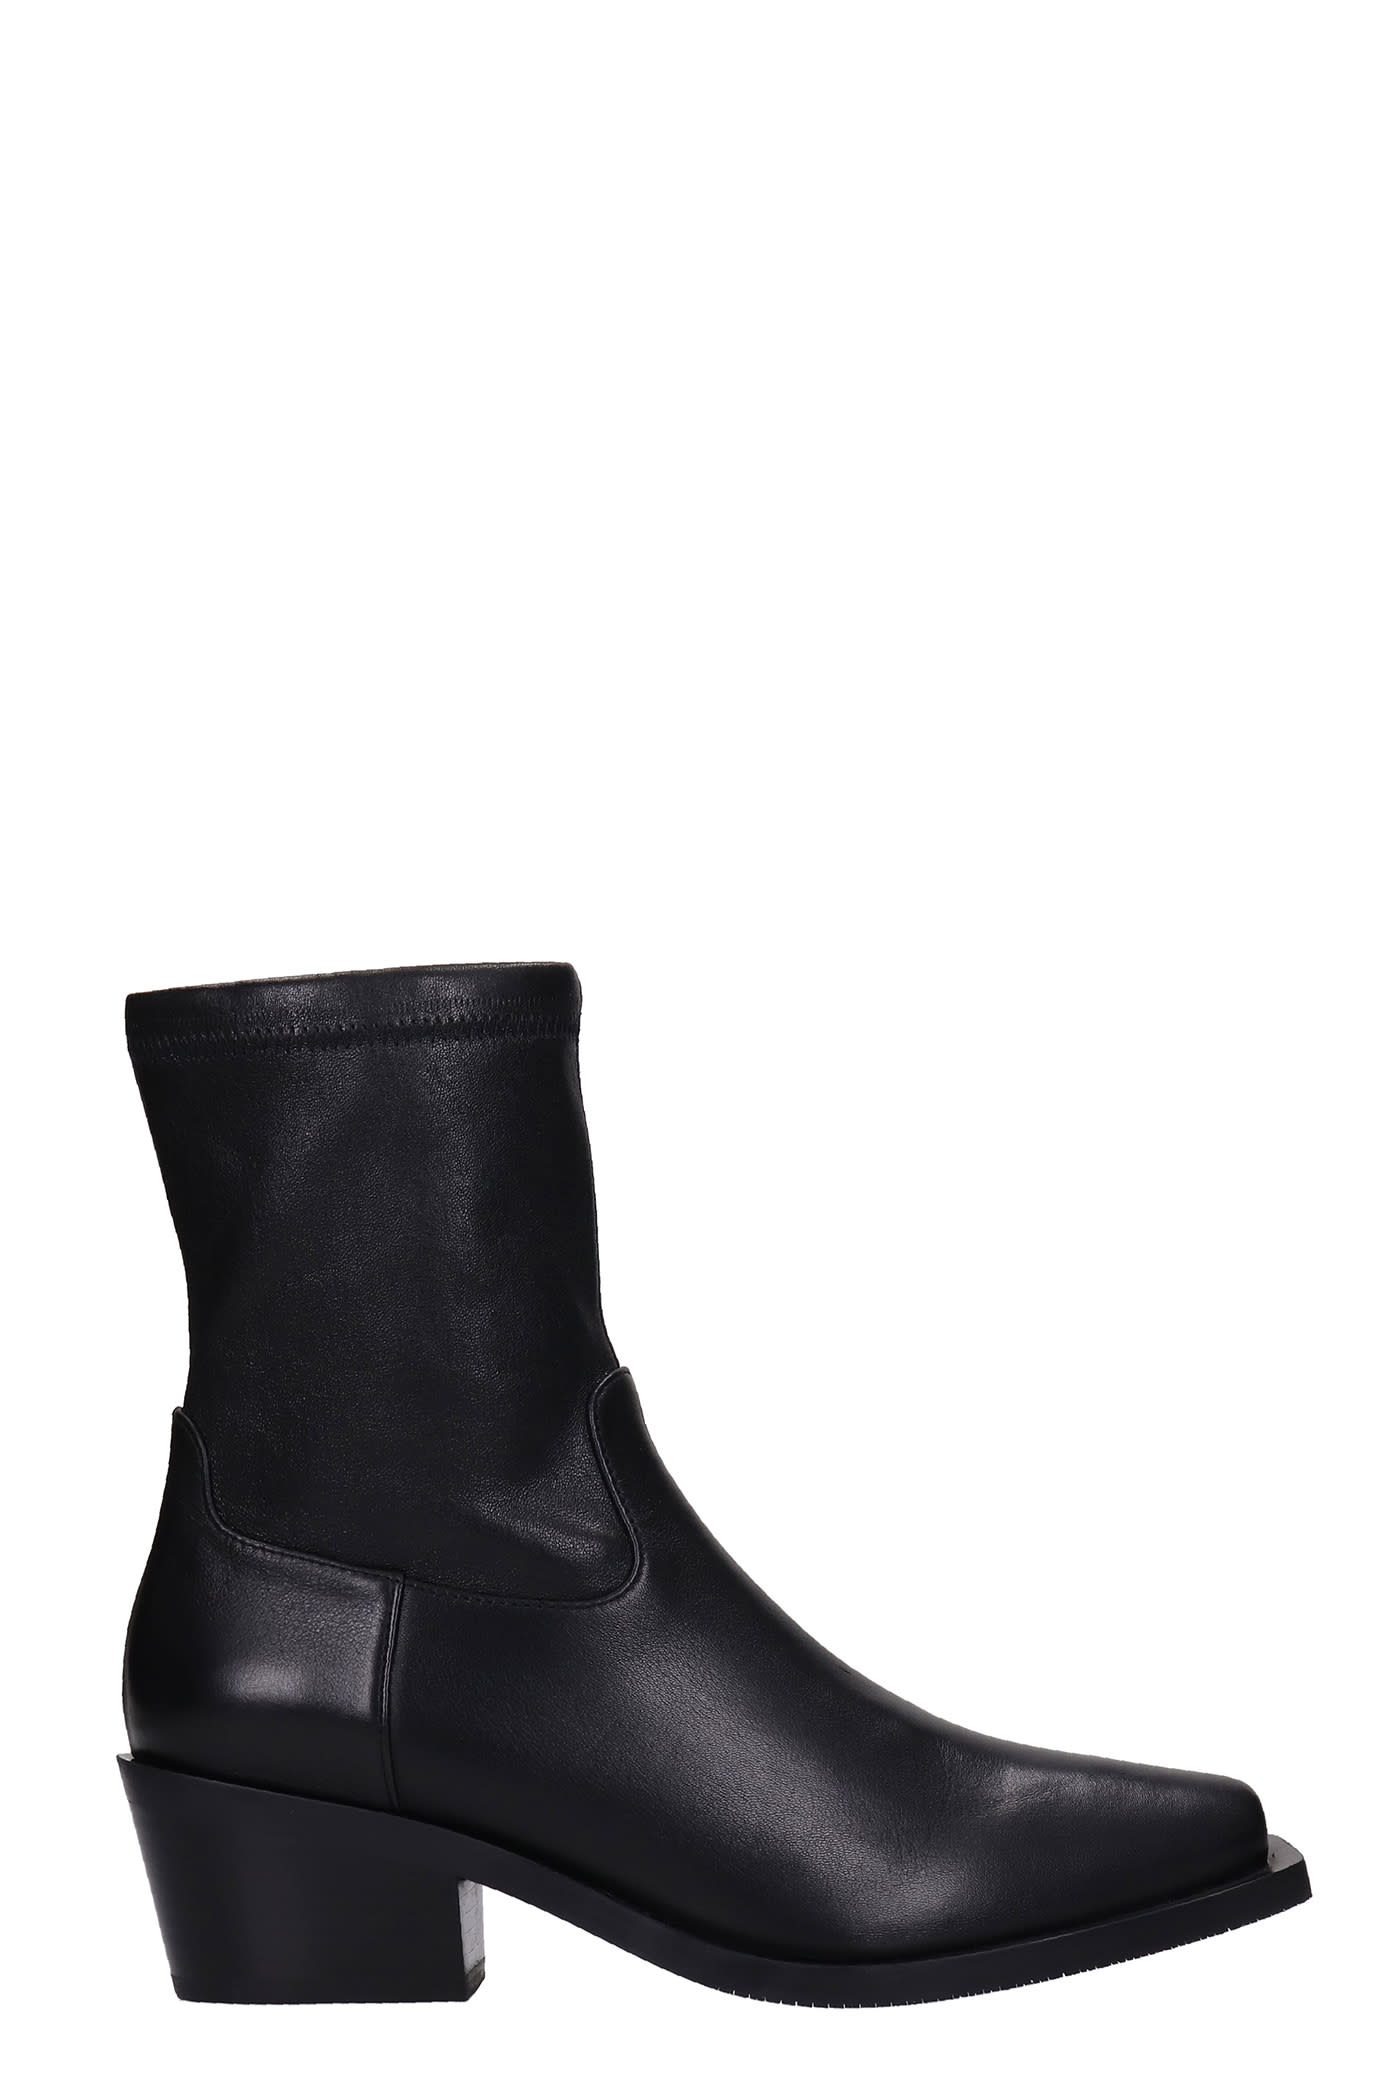 Stuart Weitzman Miles Texan Ankle Boots In Black Leather